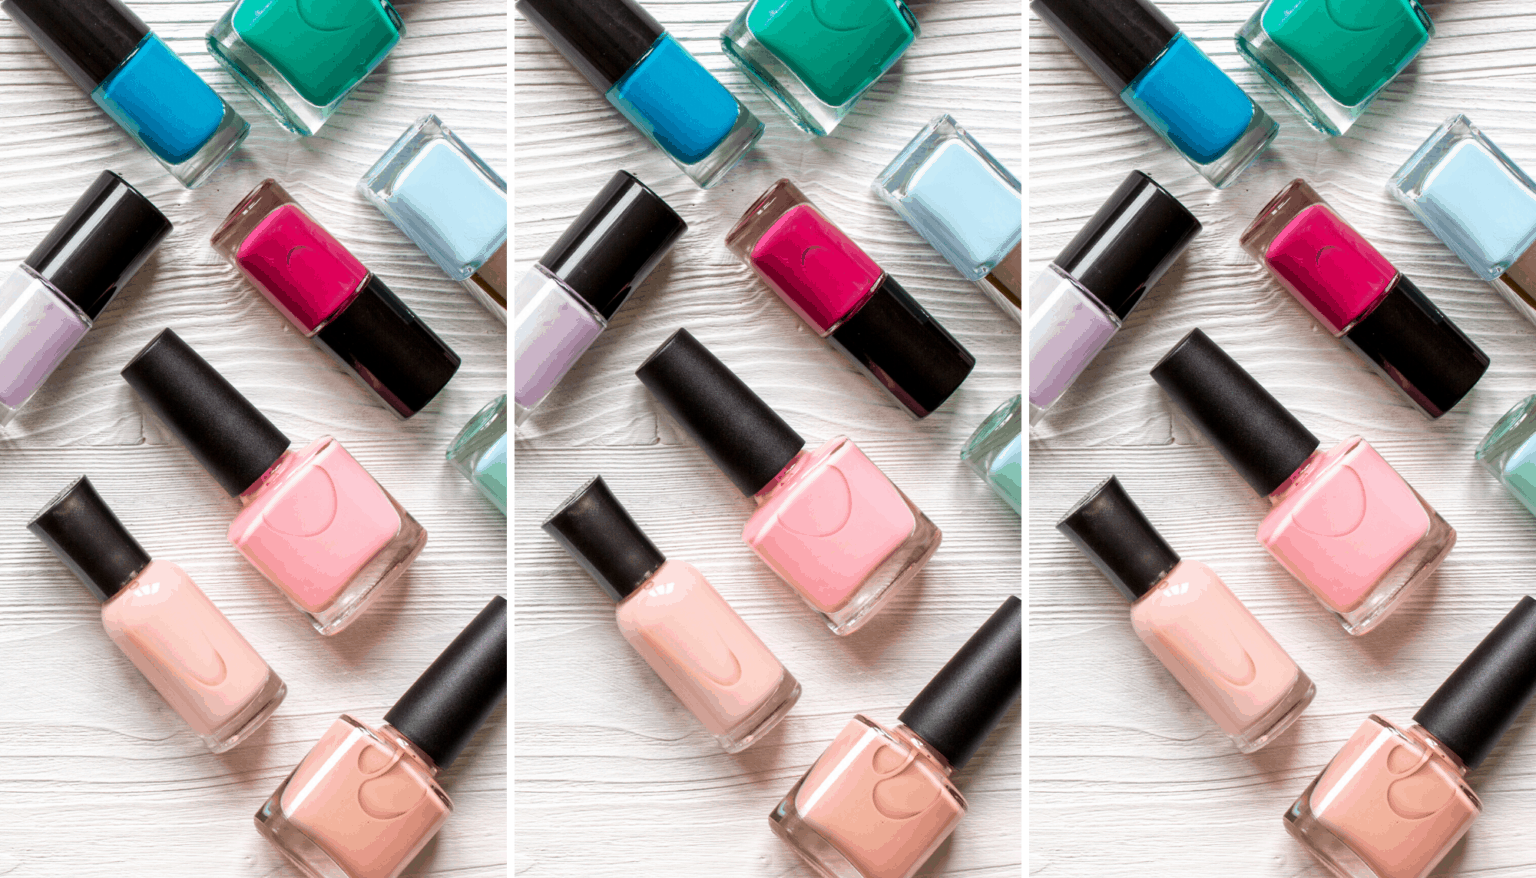 2. Best CR Nail Polish Colors - wide 6